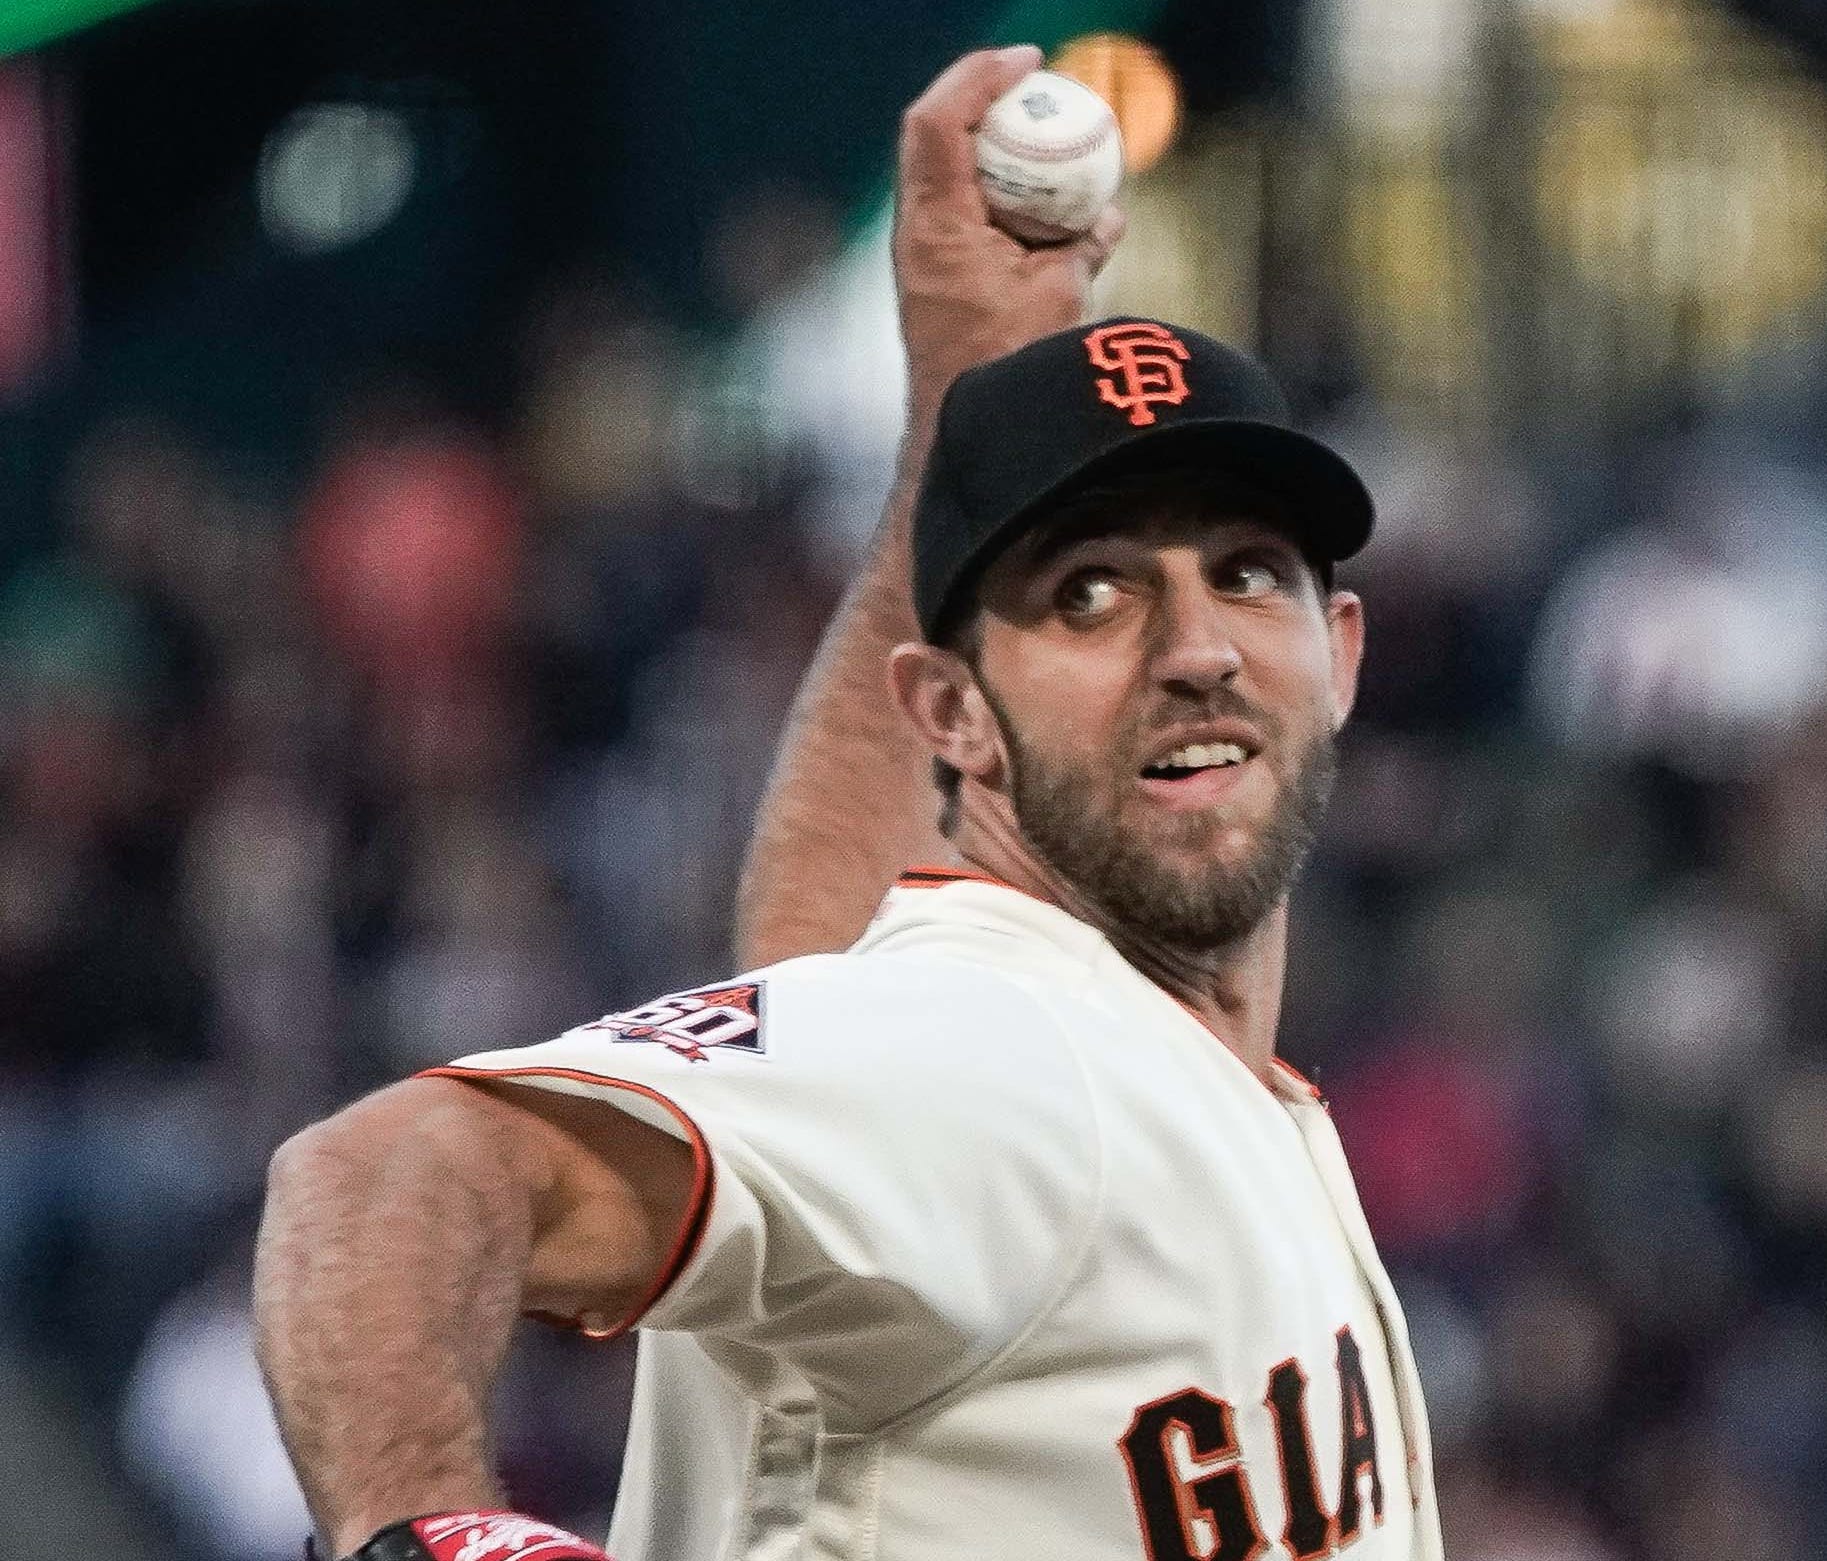 Madison Bumgarner went six innings in his first start of the season.